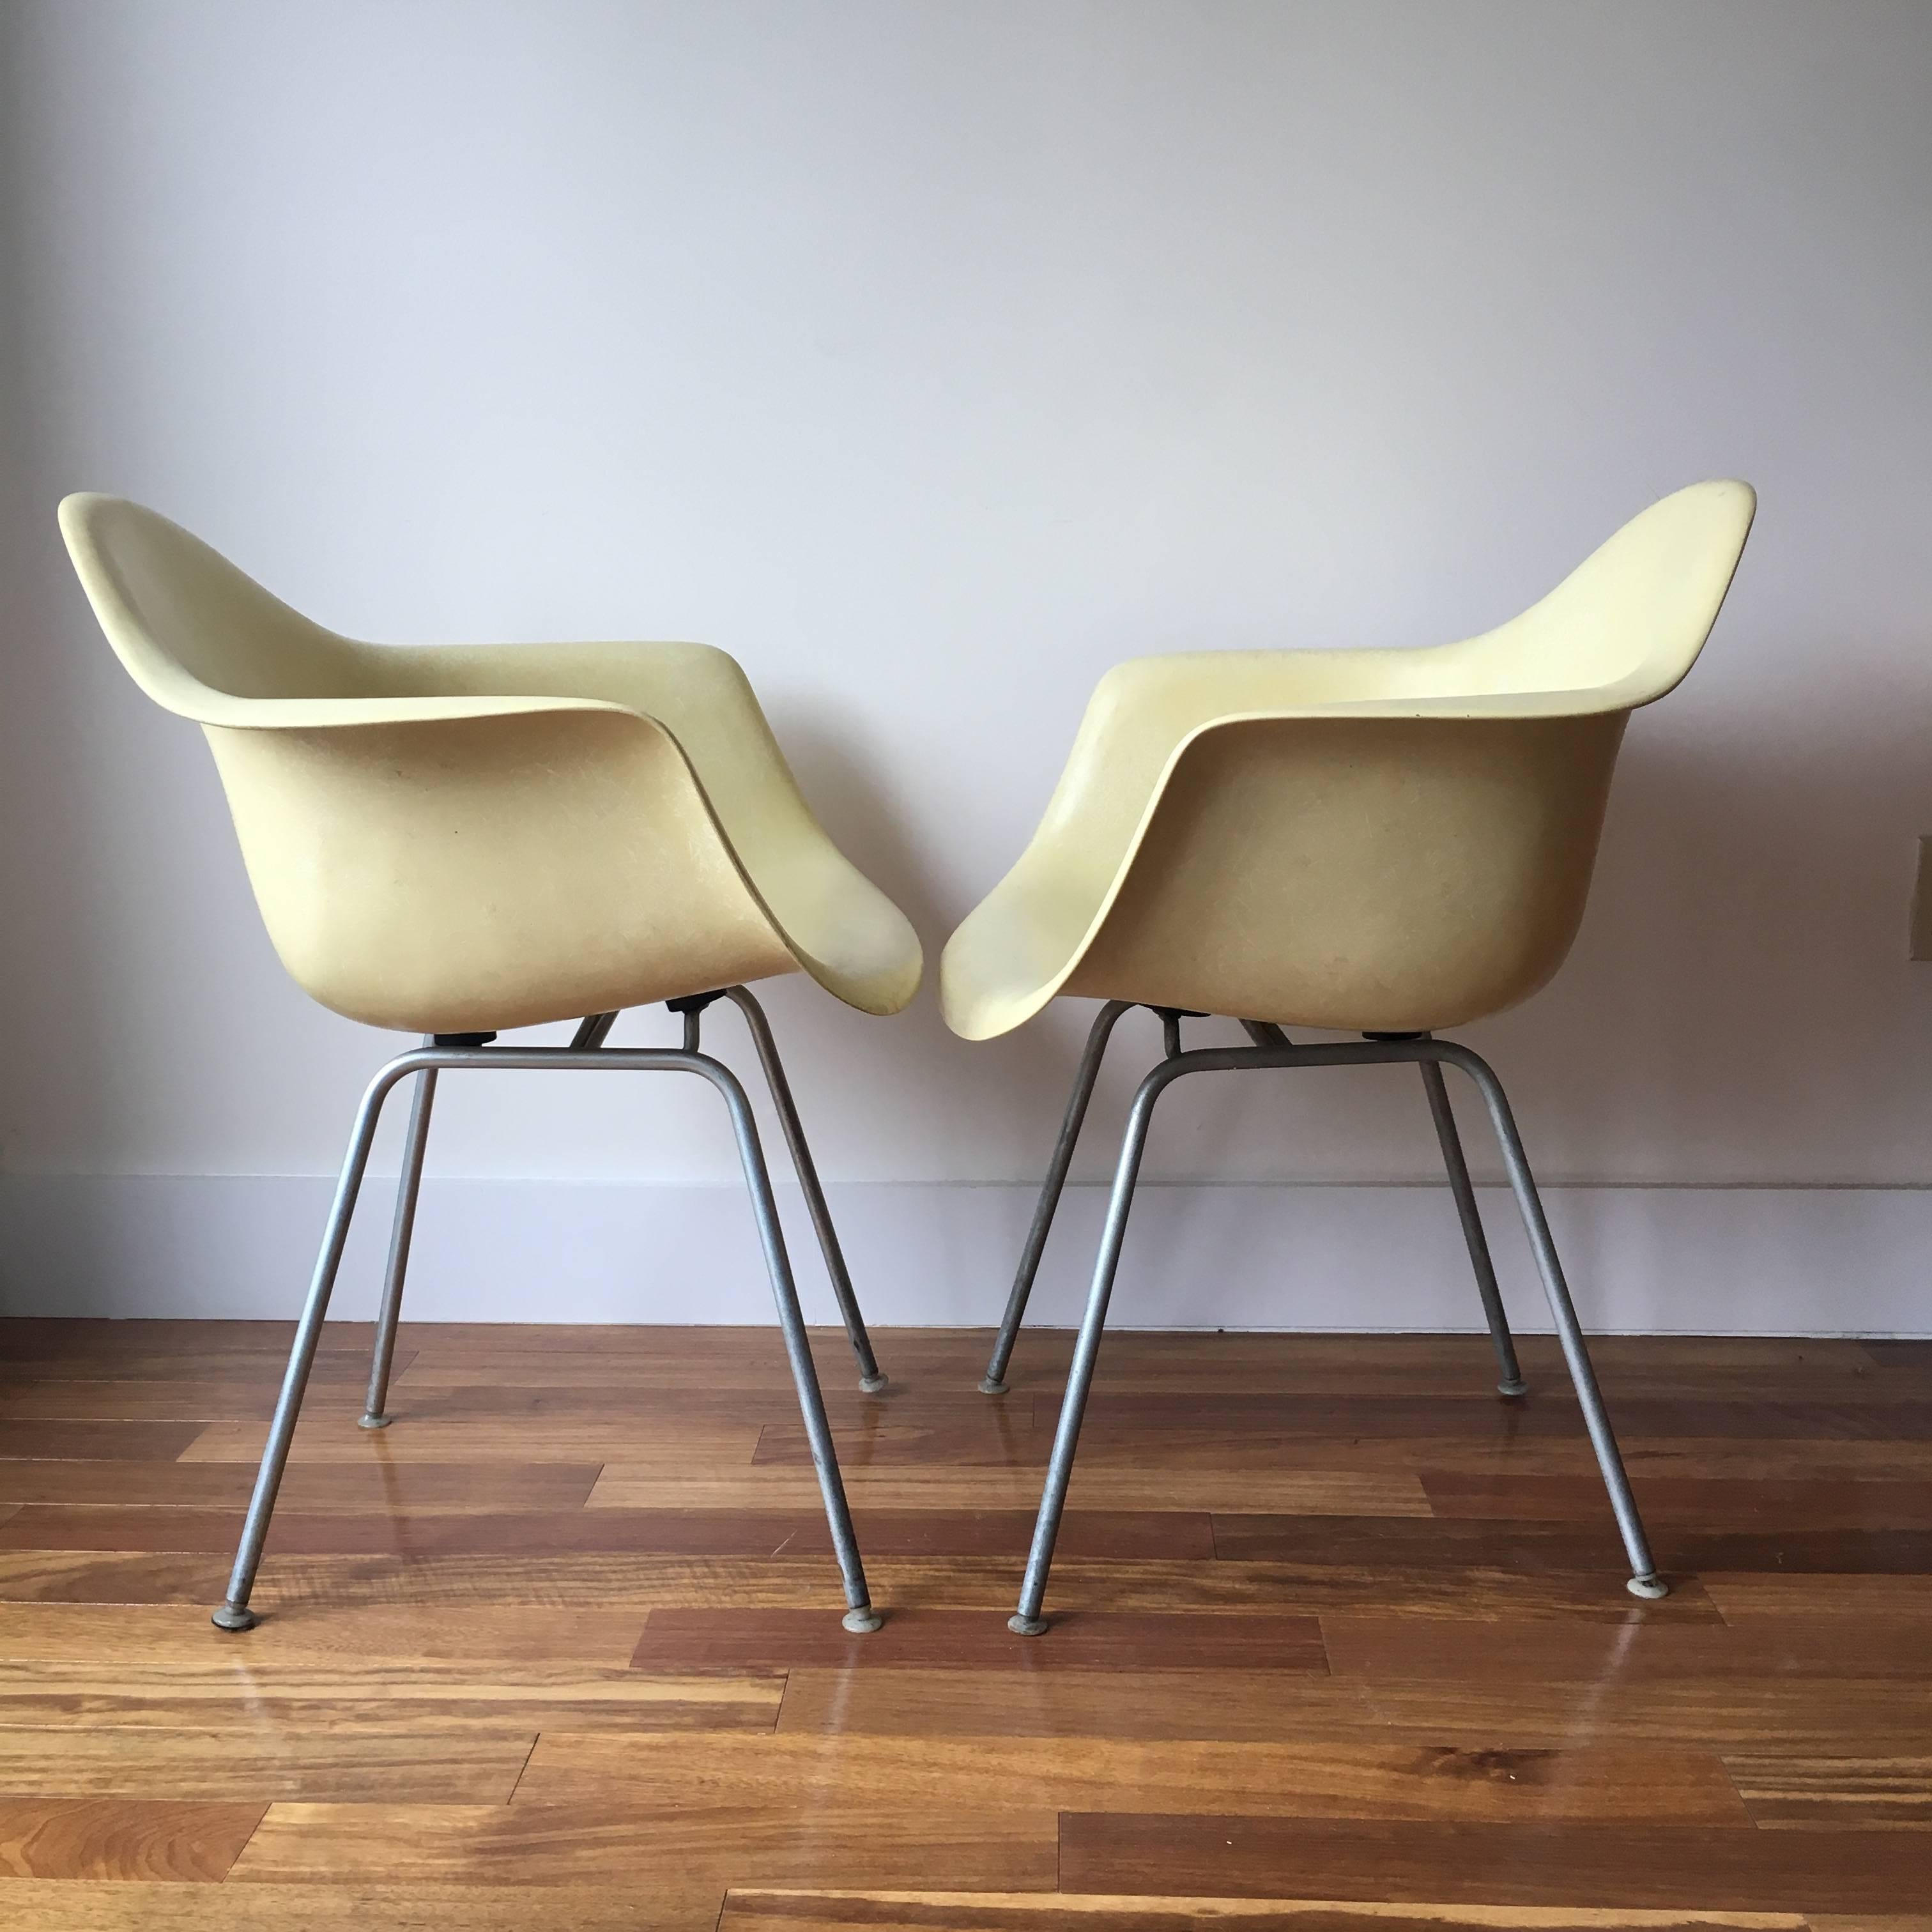 Steel Two Herman Miller Eames DAX Armchairs in Parchment